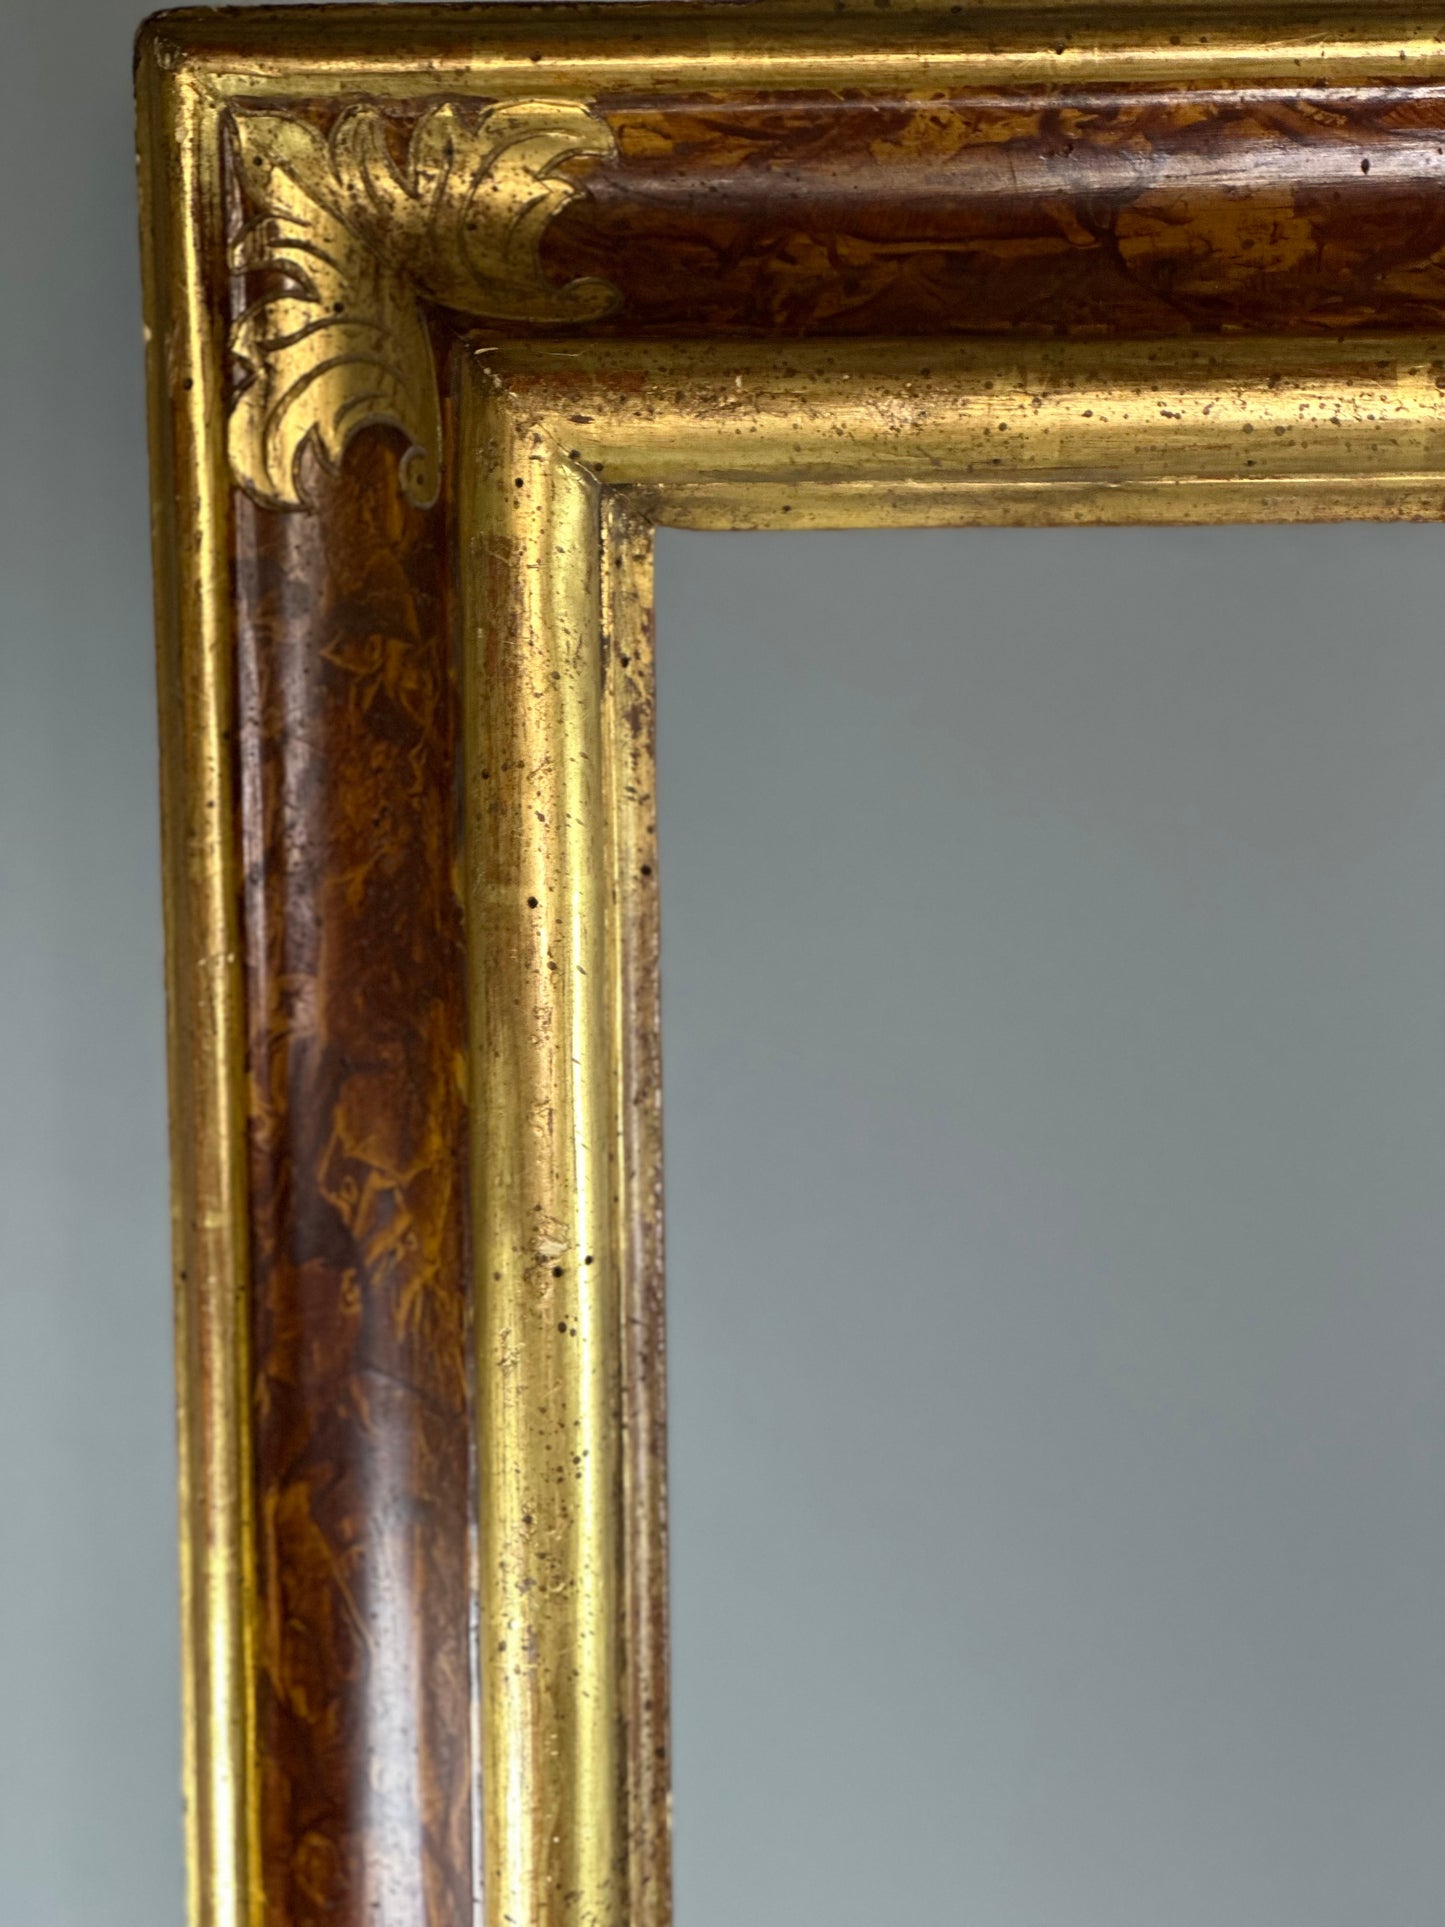 Early 19th Century Gold Gilt Frame